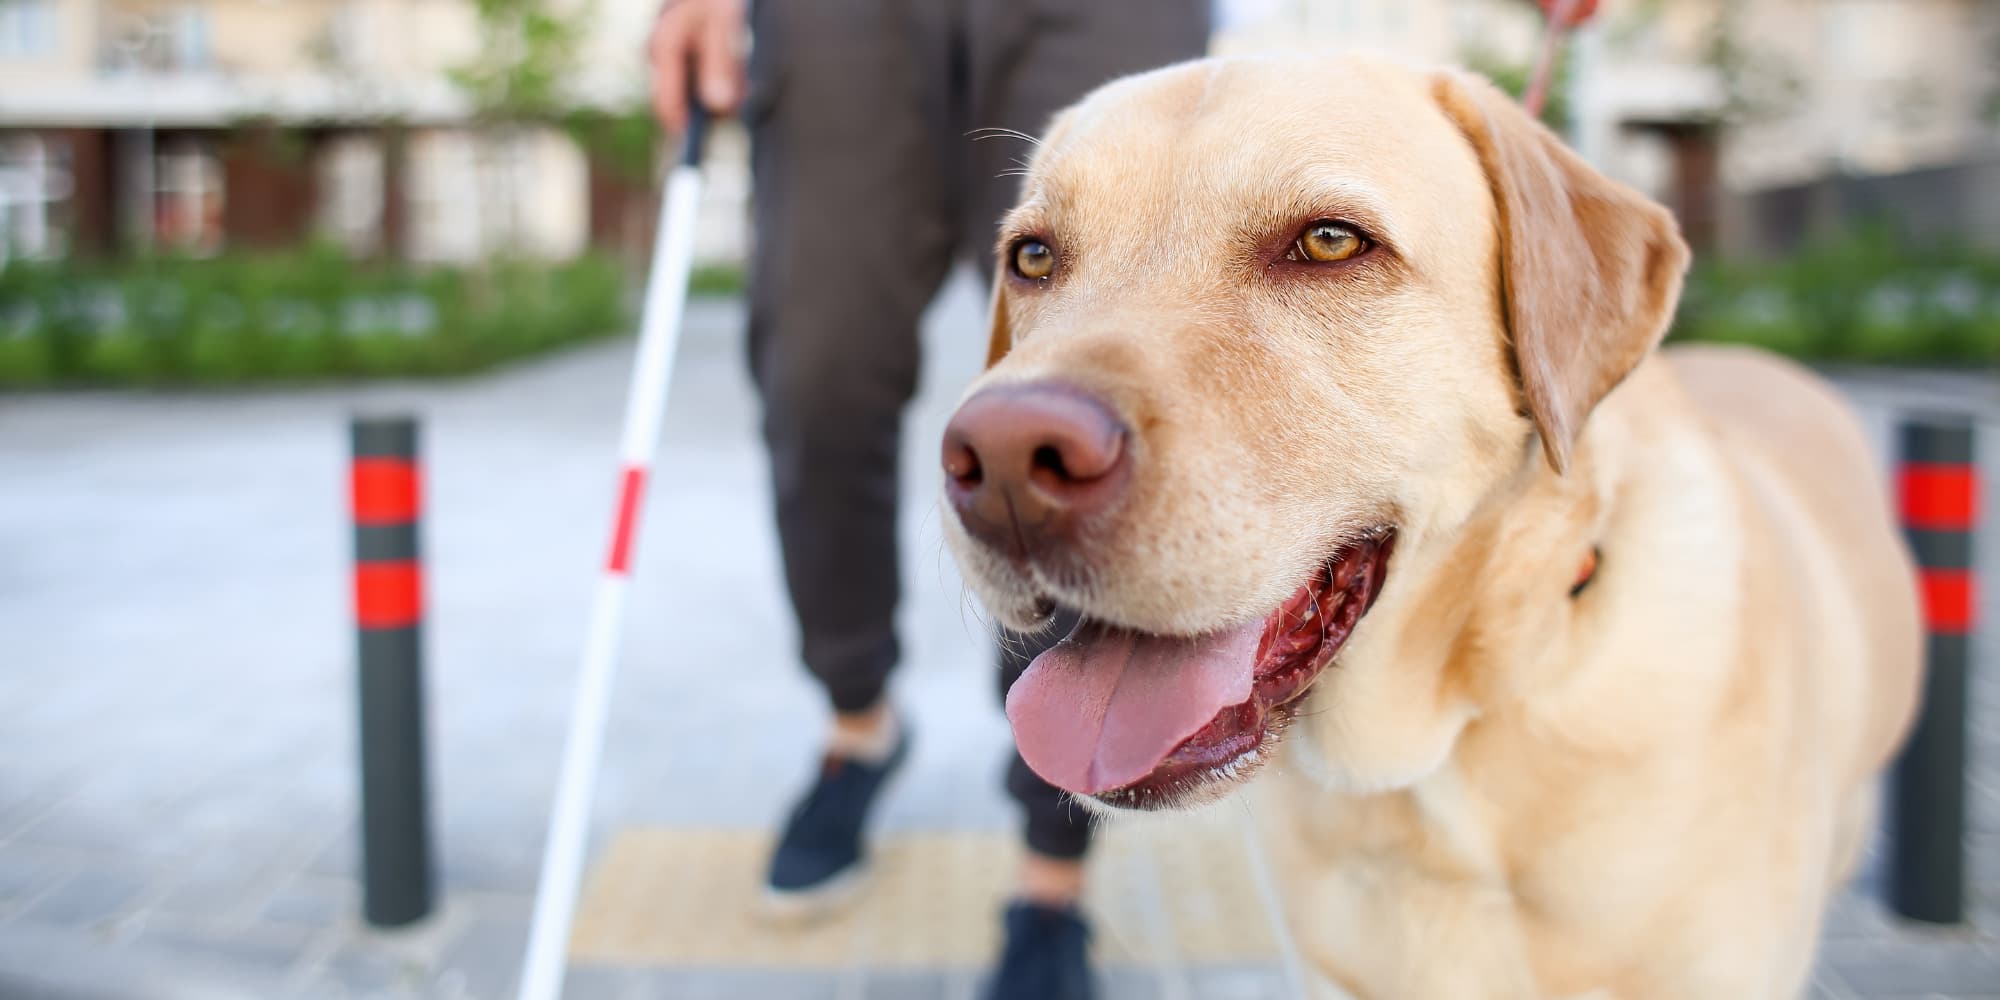 A close up of a golden guide dog as it guides a blind person in the background with a white cane.